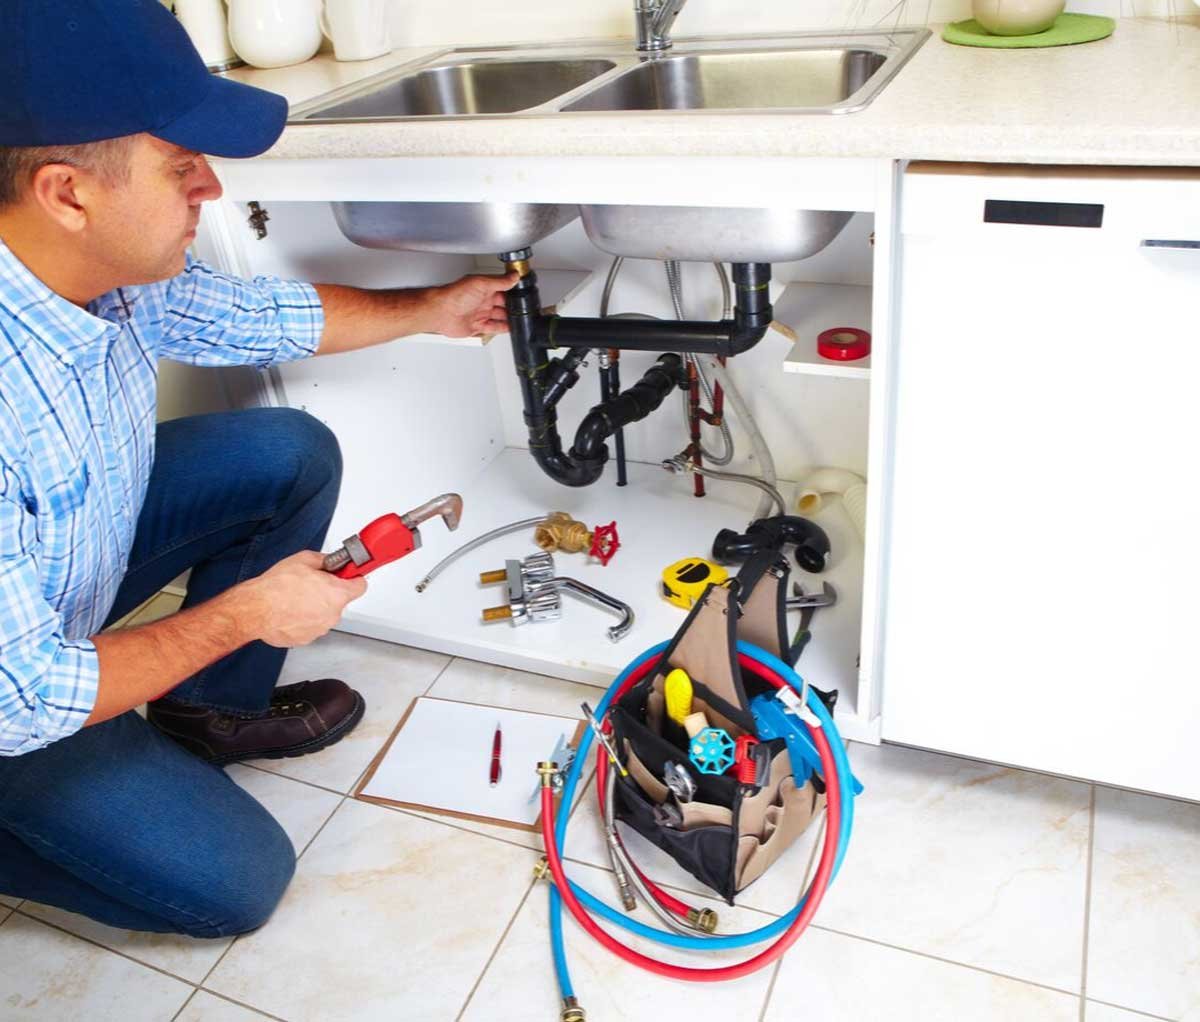 Essential Factors to Consider When Hiring Residential Plumbers